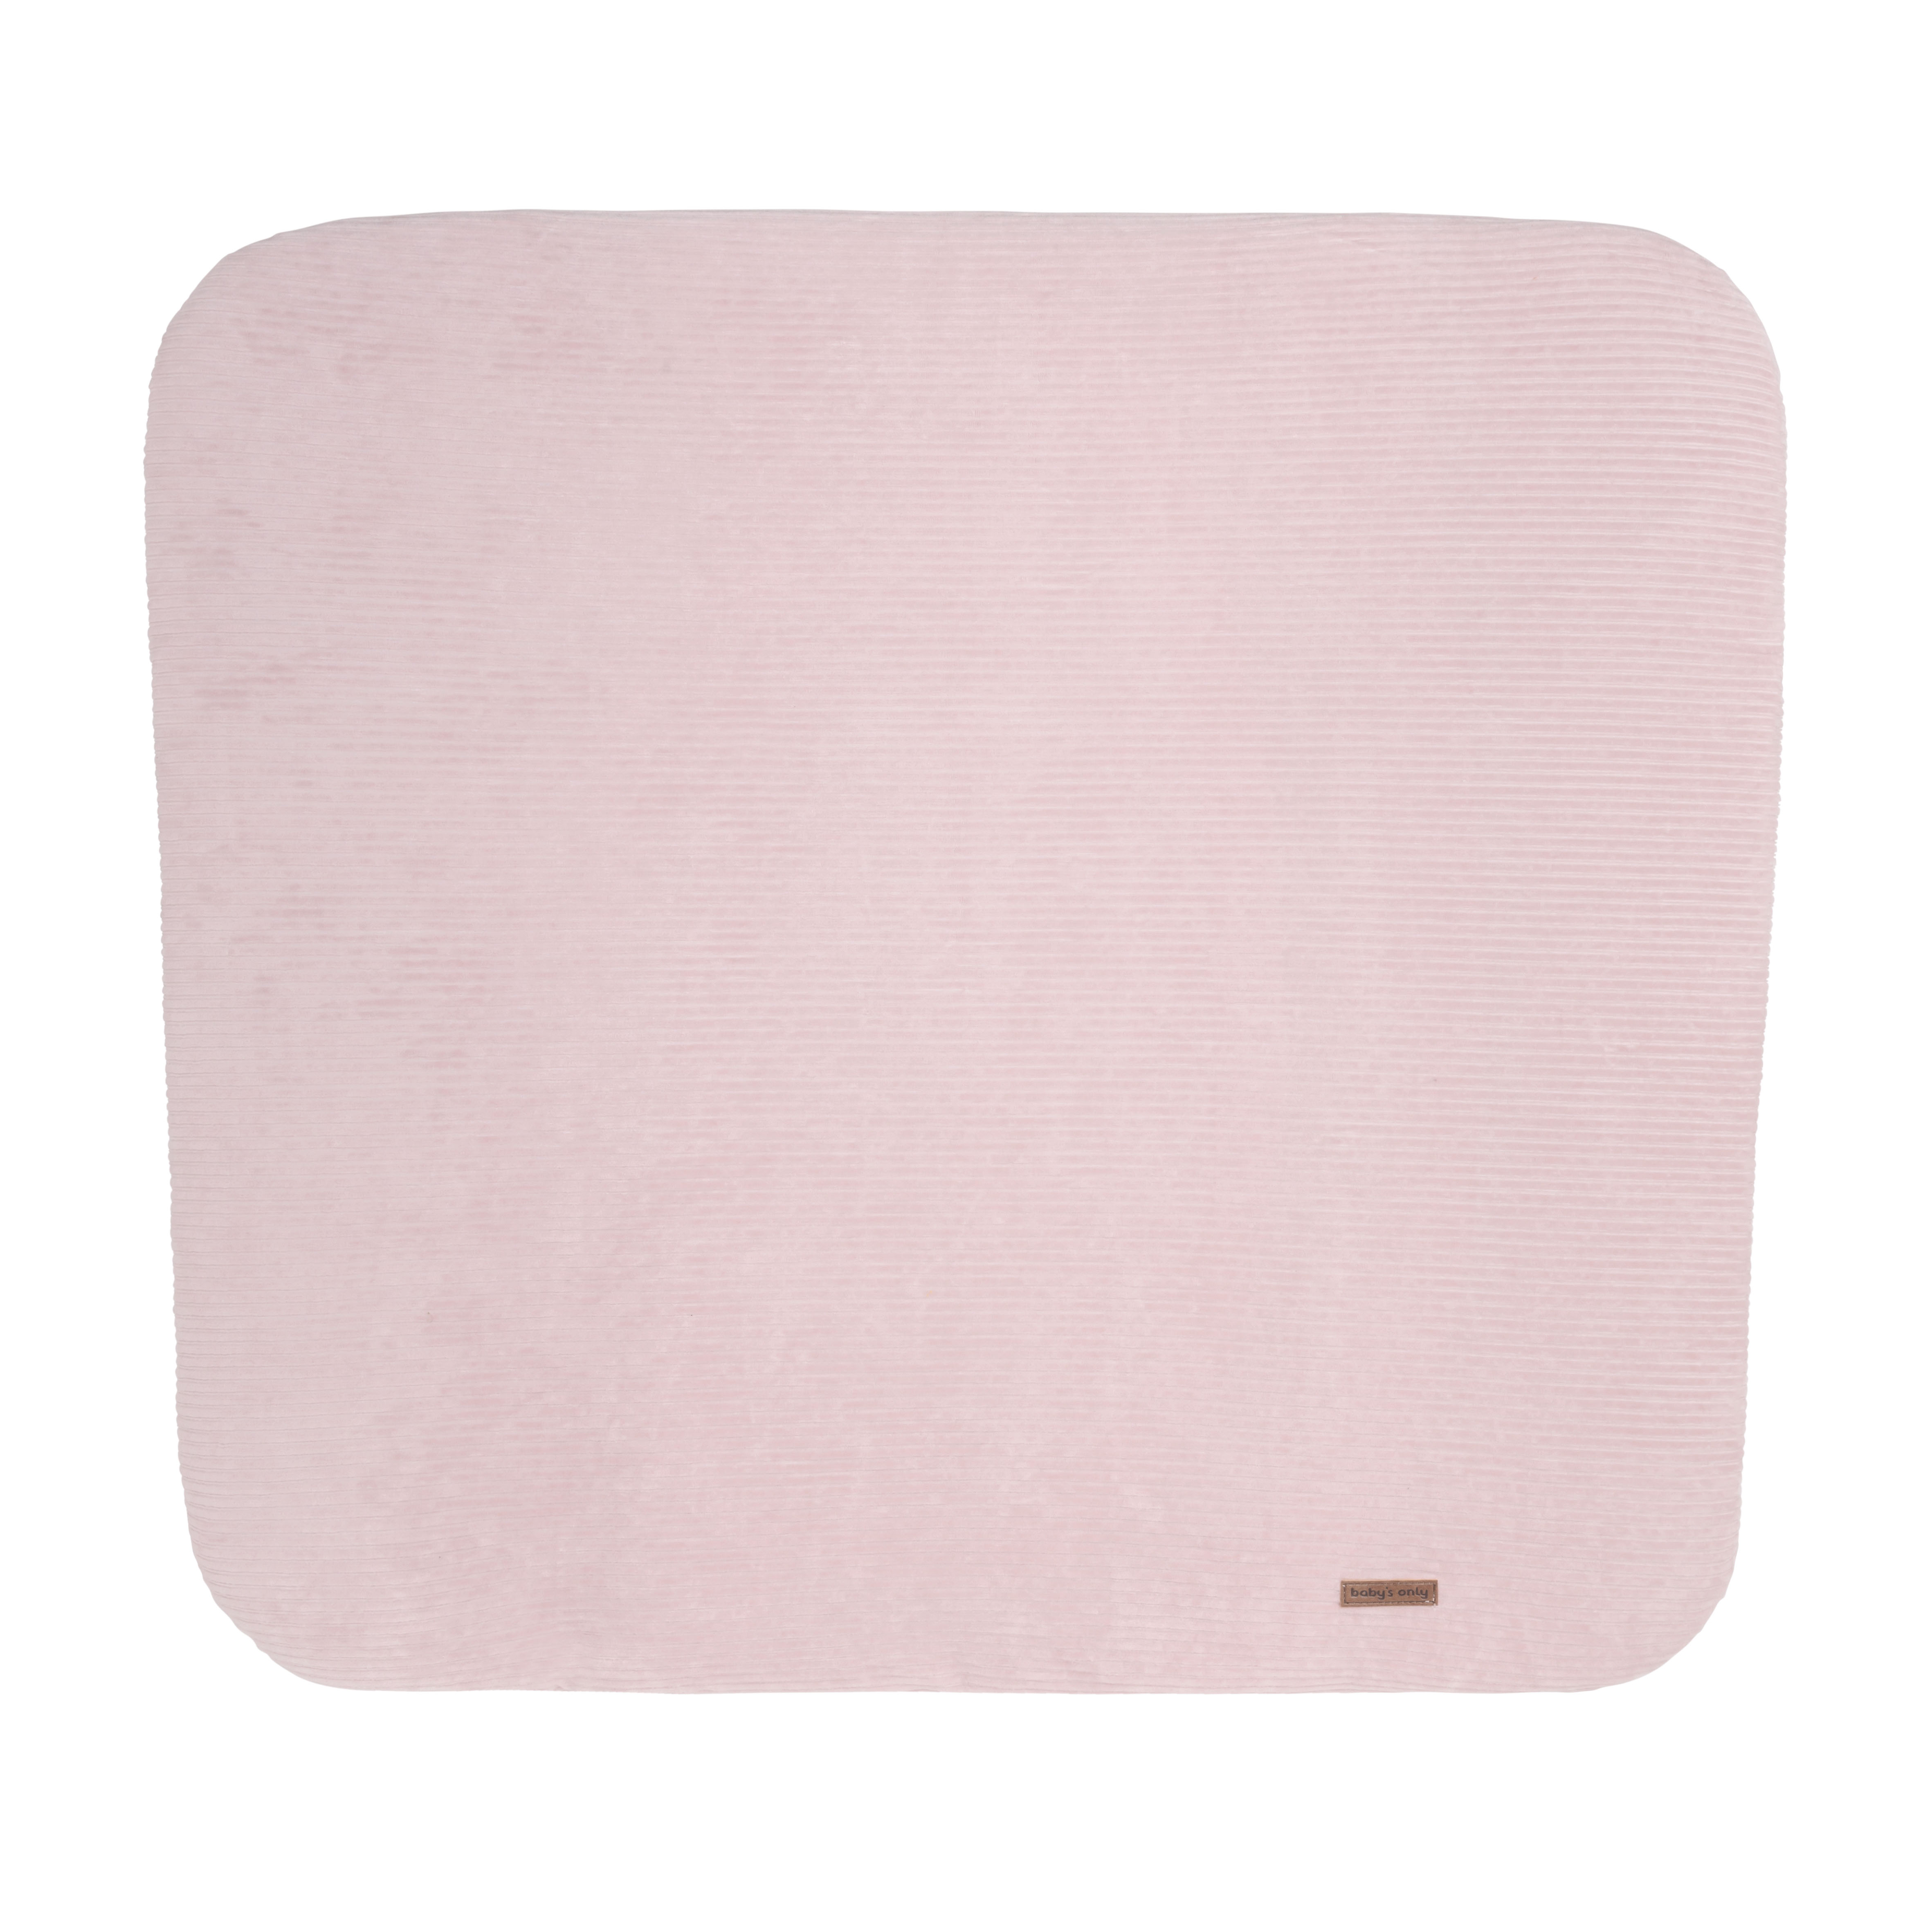 Changing pad cover Sense old pink - 75x85